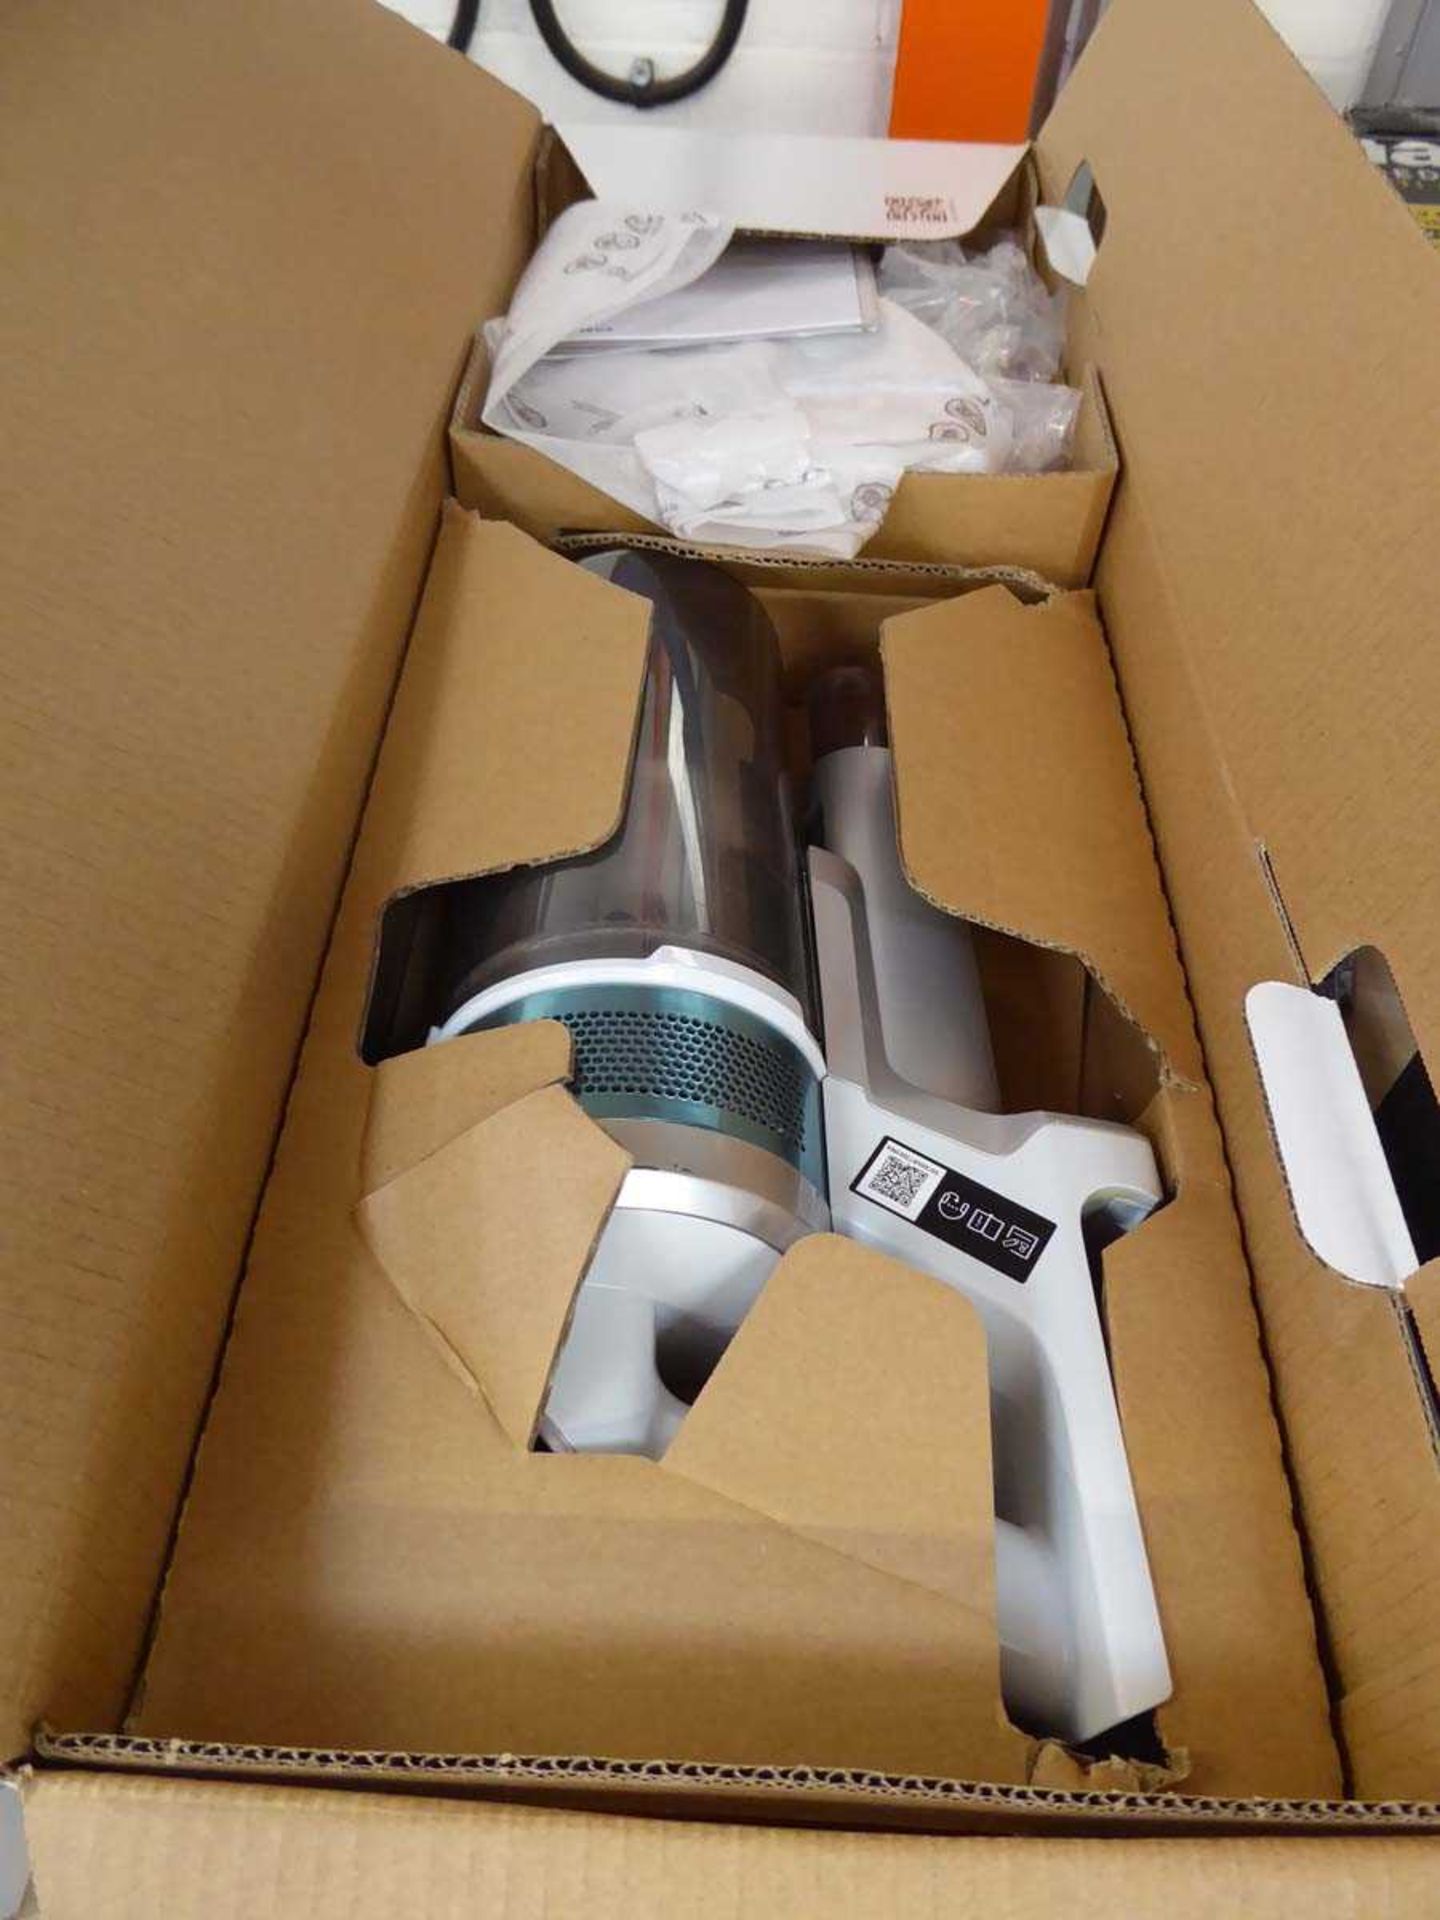 +VAT Samsung Jet 70 Series cordless stick vacuum cleaner, charger and accessories (no battery) - Image 2 of 2